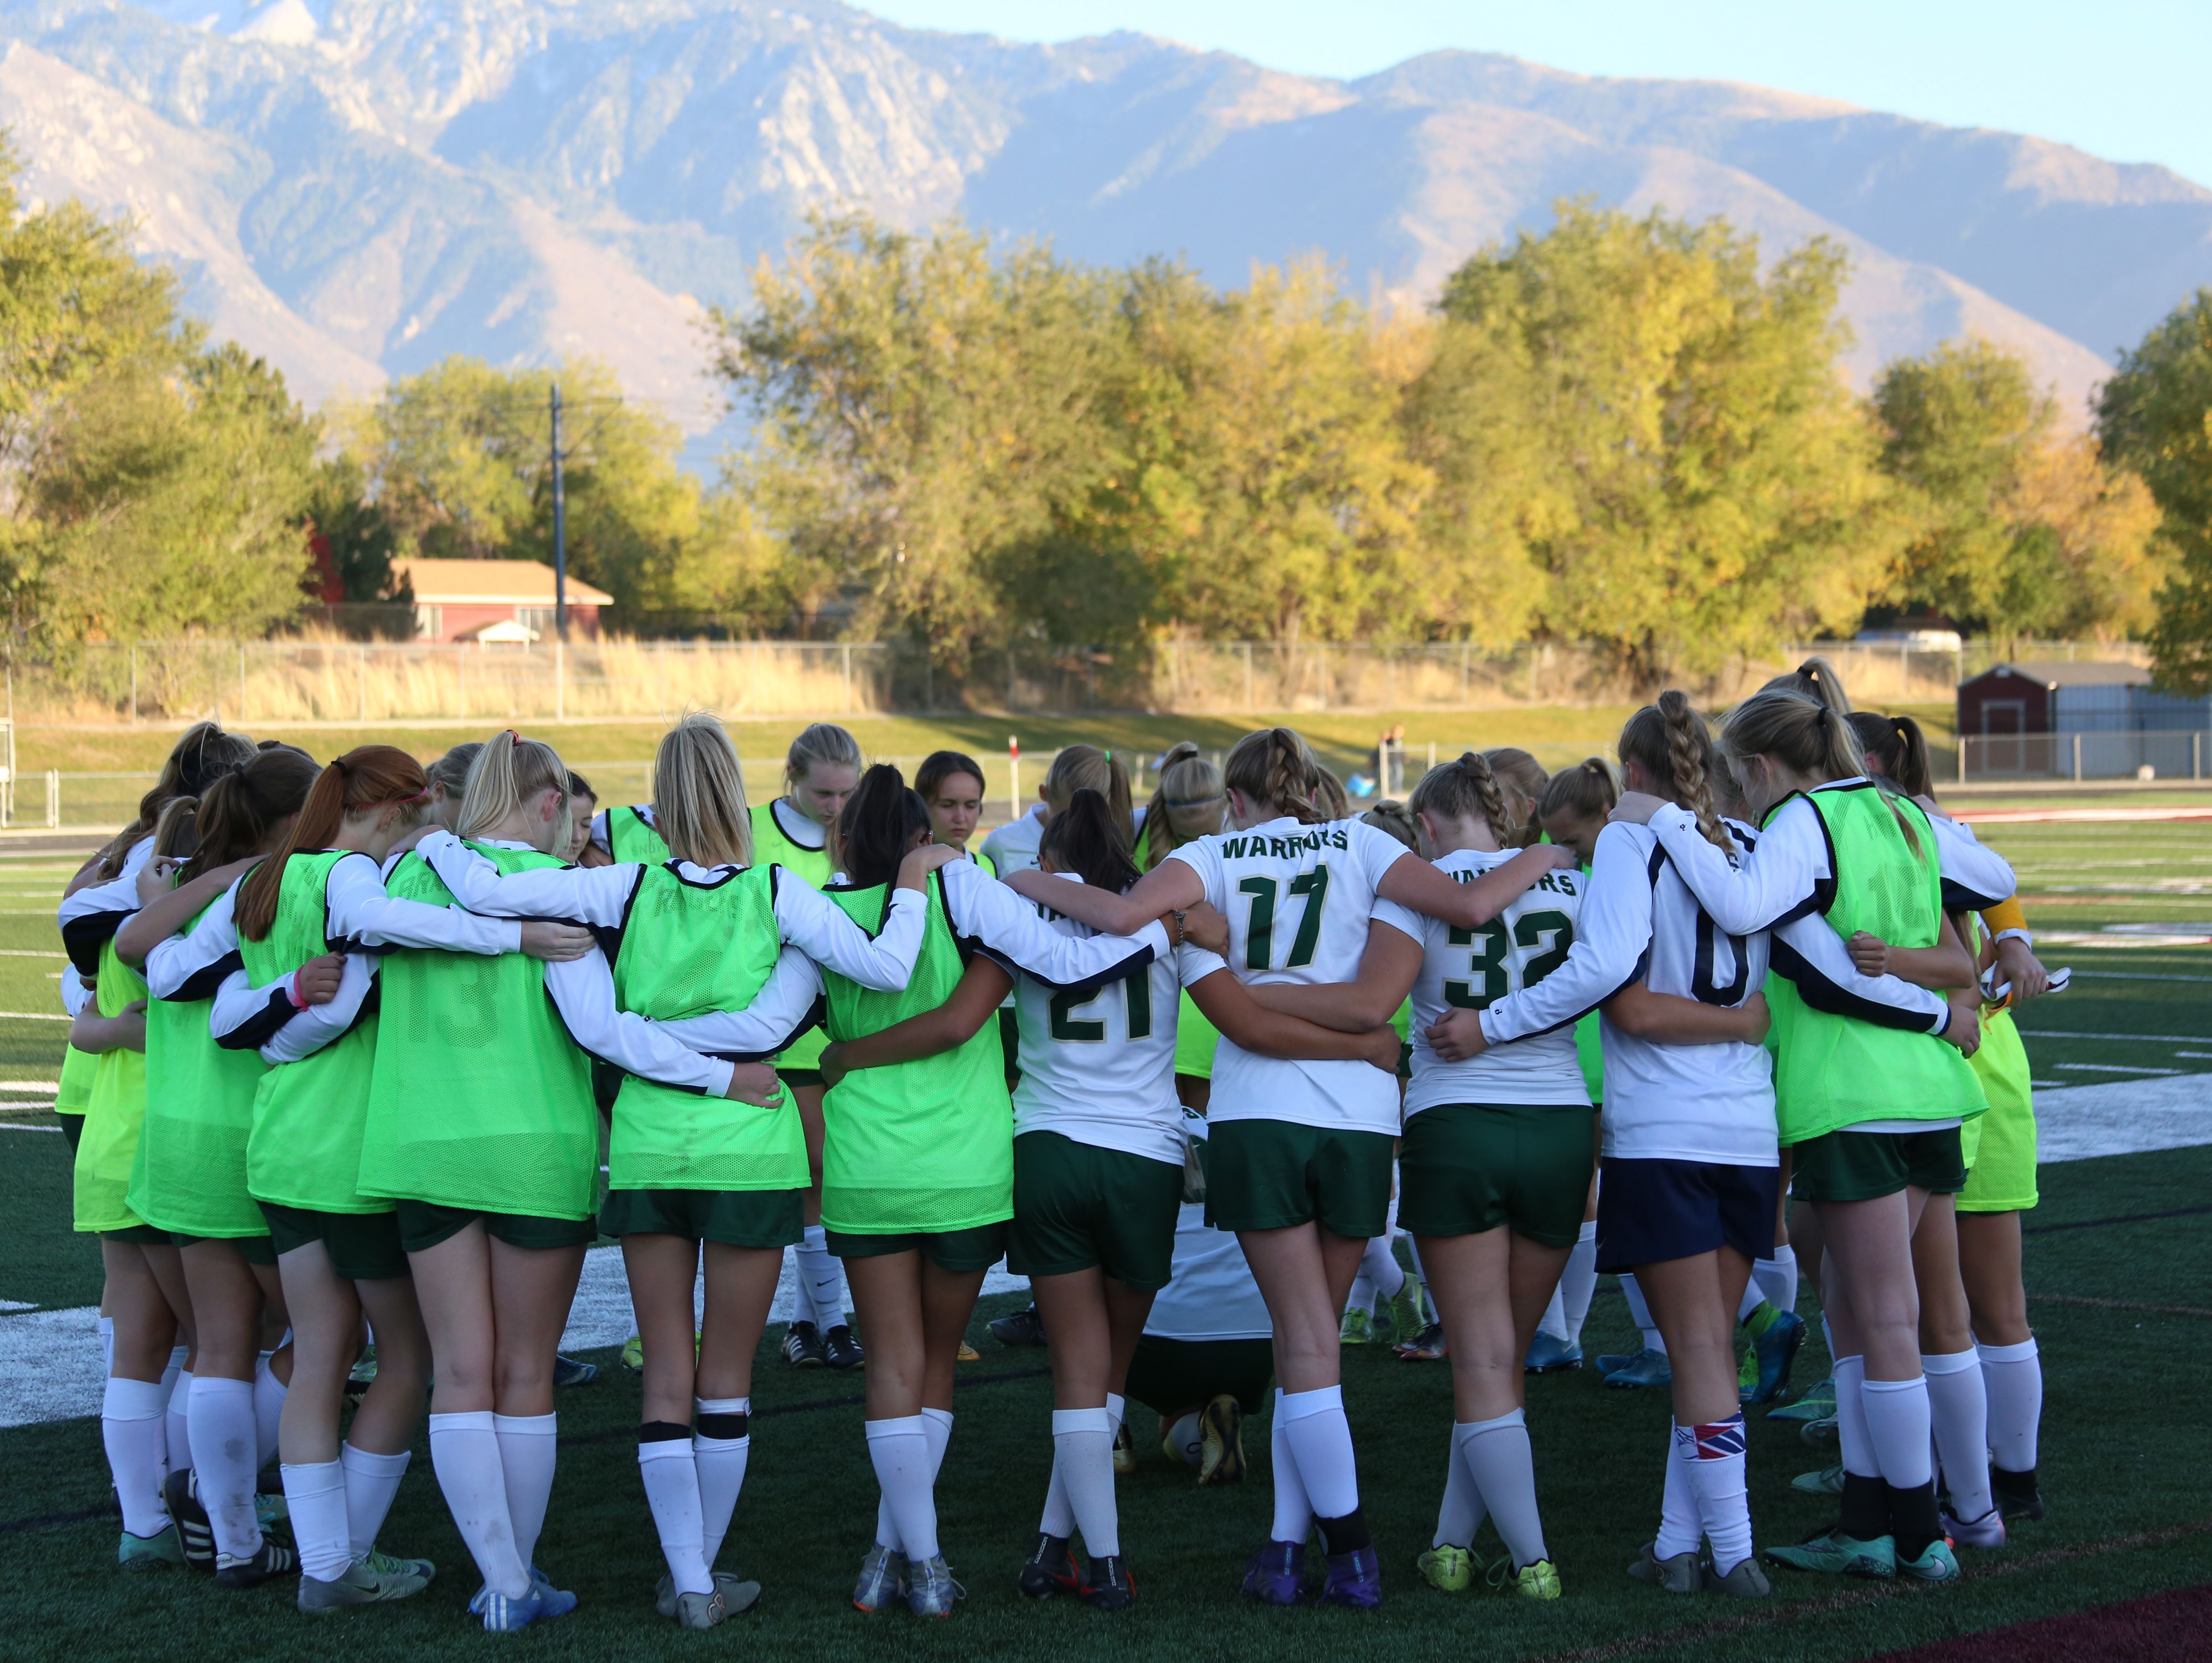 Juan Diego scored five unanswered goals to defeat Snow Canyon 5-1 at Jordan High School in the 3A semifinal game. The Soaring Eagle will play Logan at Rio Tinto Stadium for the 3A championship. Brielle Hoskins scored the only goal of the game for the Warriors.